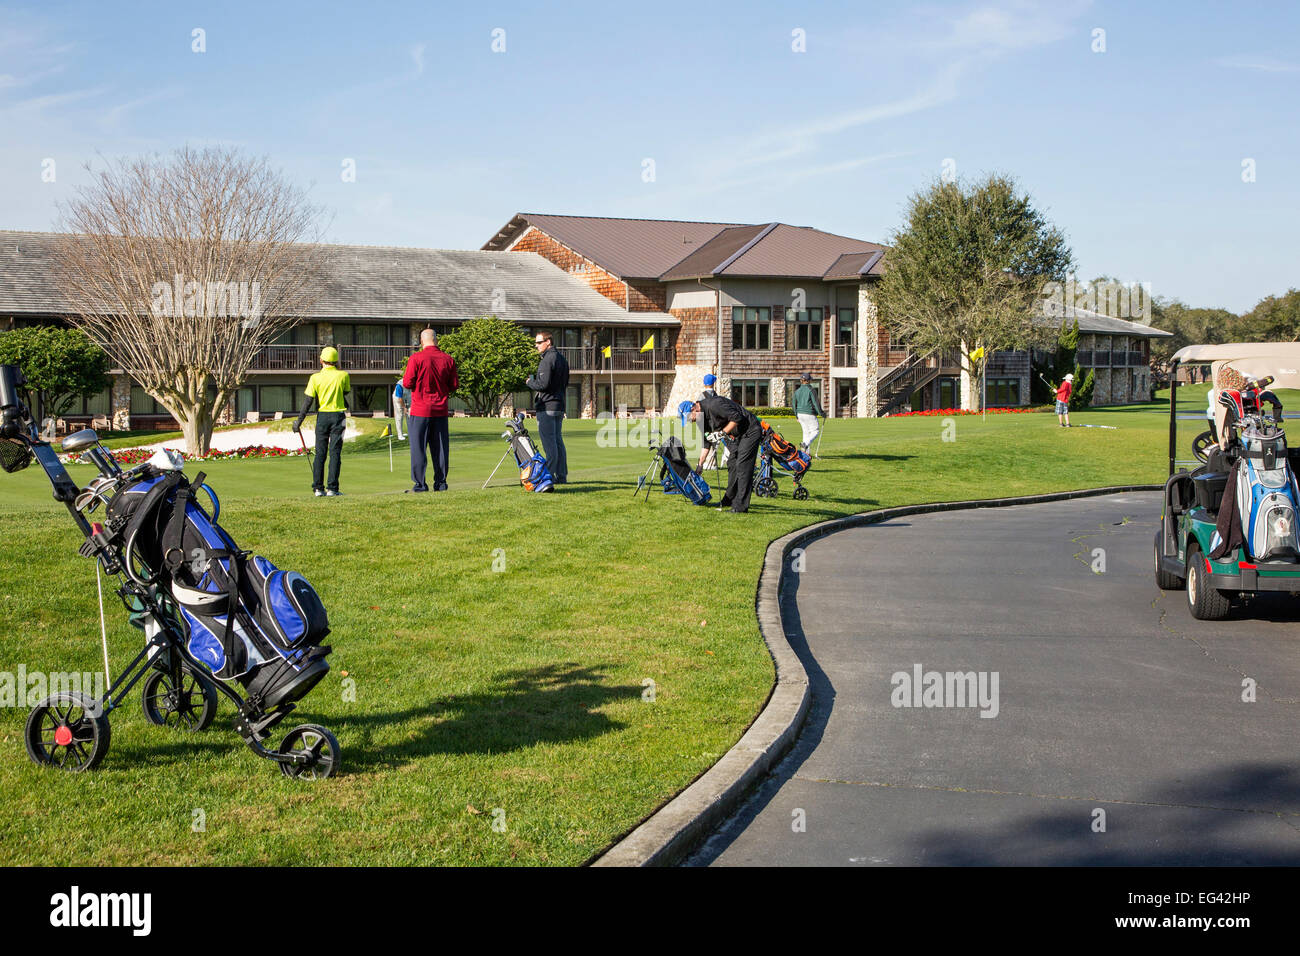 Golfers  on the putting practice area outside the Bay Hill hotel of Bay Hill Golf Club, Orlando, Florida, America. Stock Photo